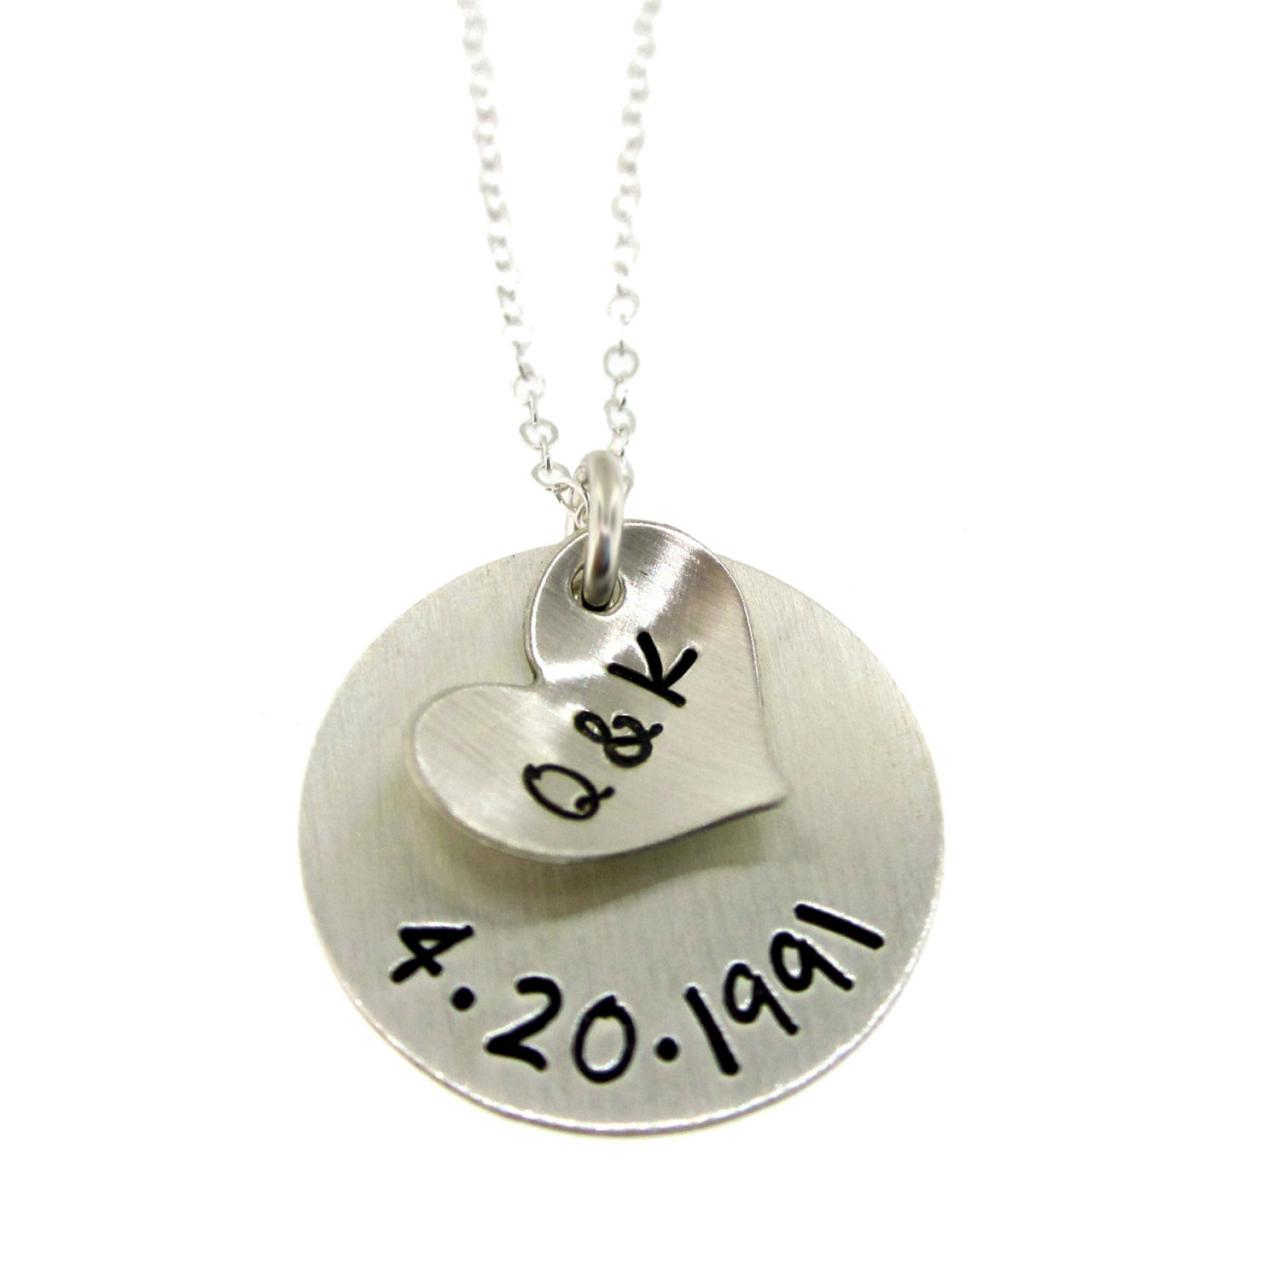 Hand Stamped Jewelry - Our Initials And Anniversary Date Personalized Mothers Jewelry